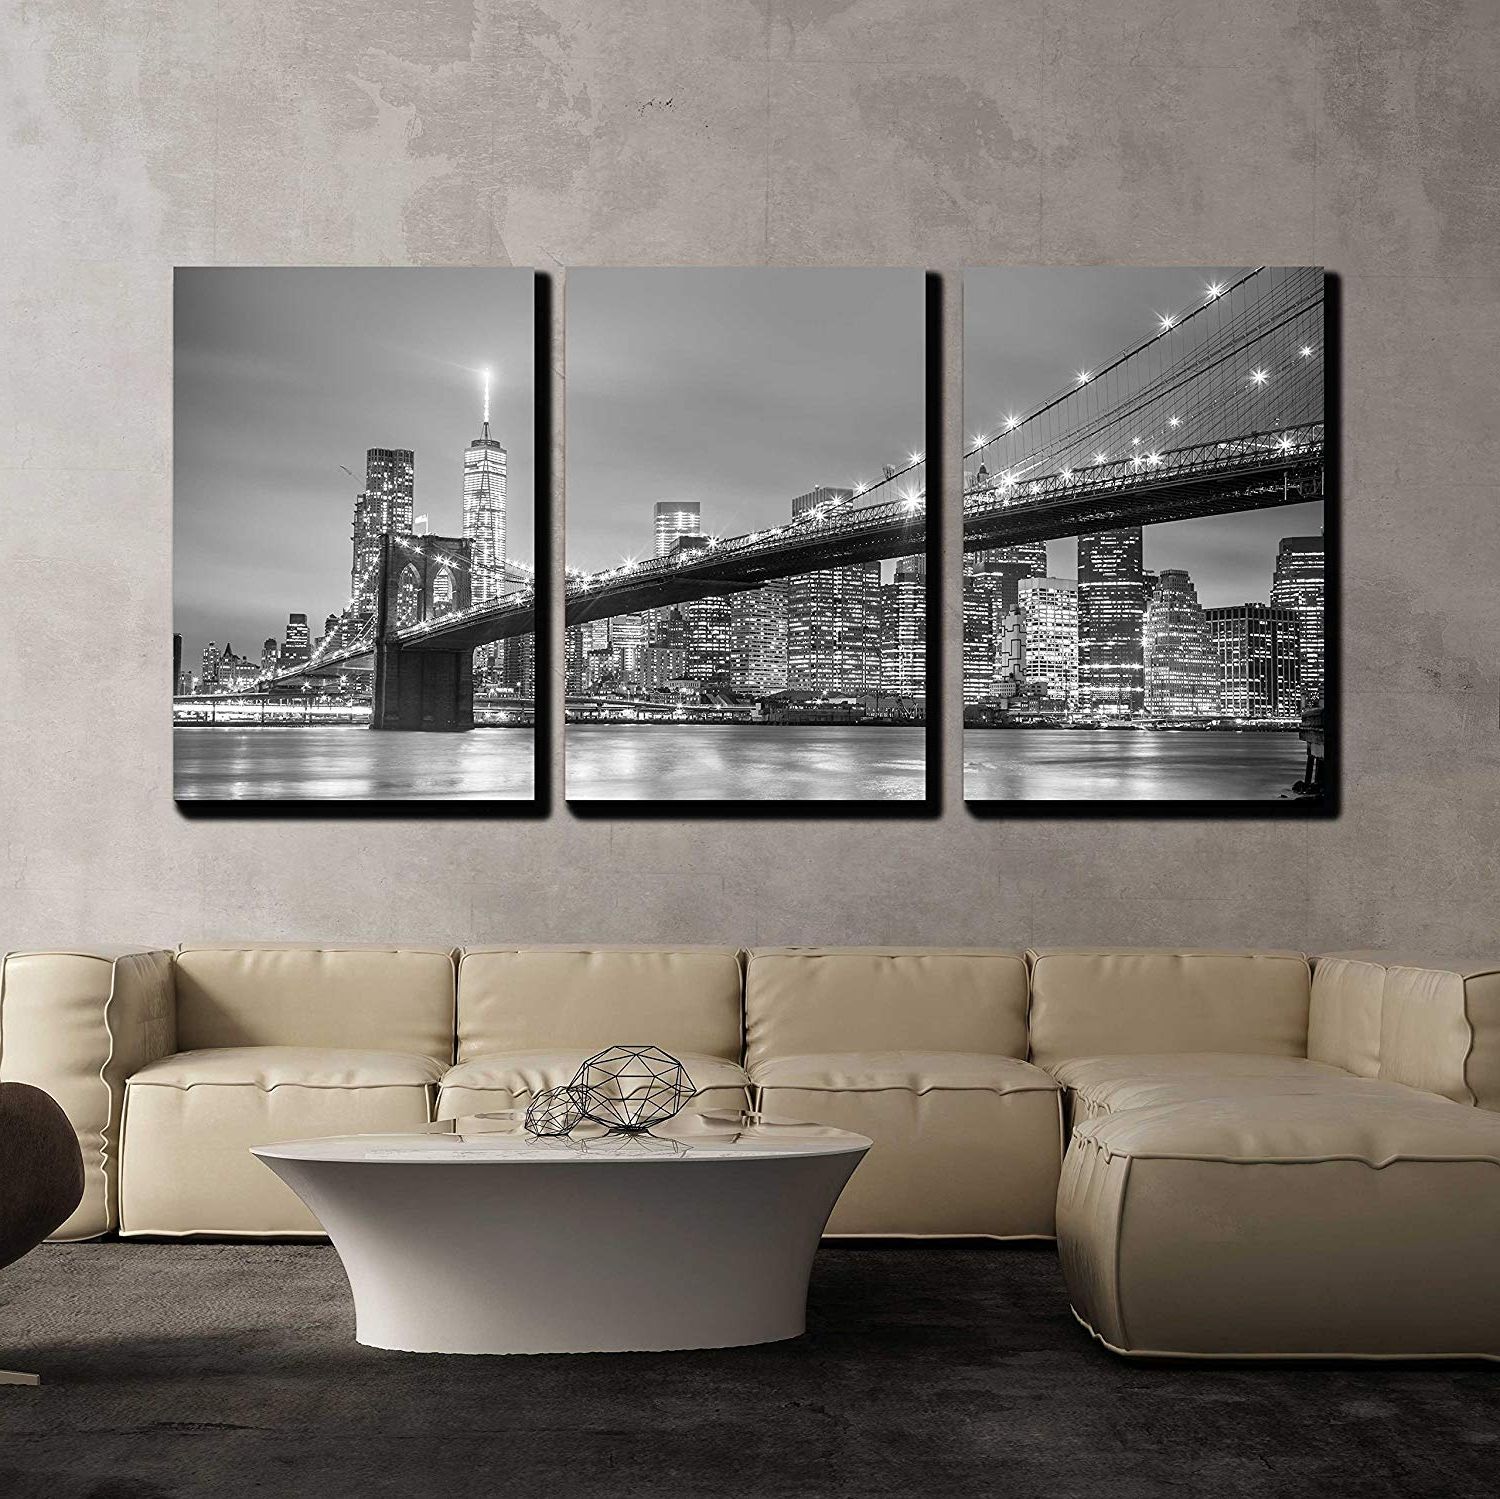 Well Liked Town Wall Art For Wall26 3 Panels Canvas Art Black And White City Landscape Prints Modern Wall  Art Decor, 24 X 36 Inch – Walmart (View 15 of 15)